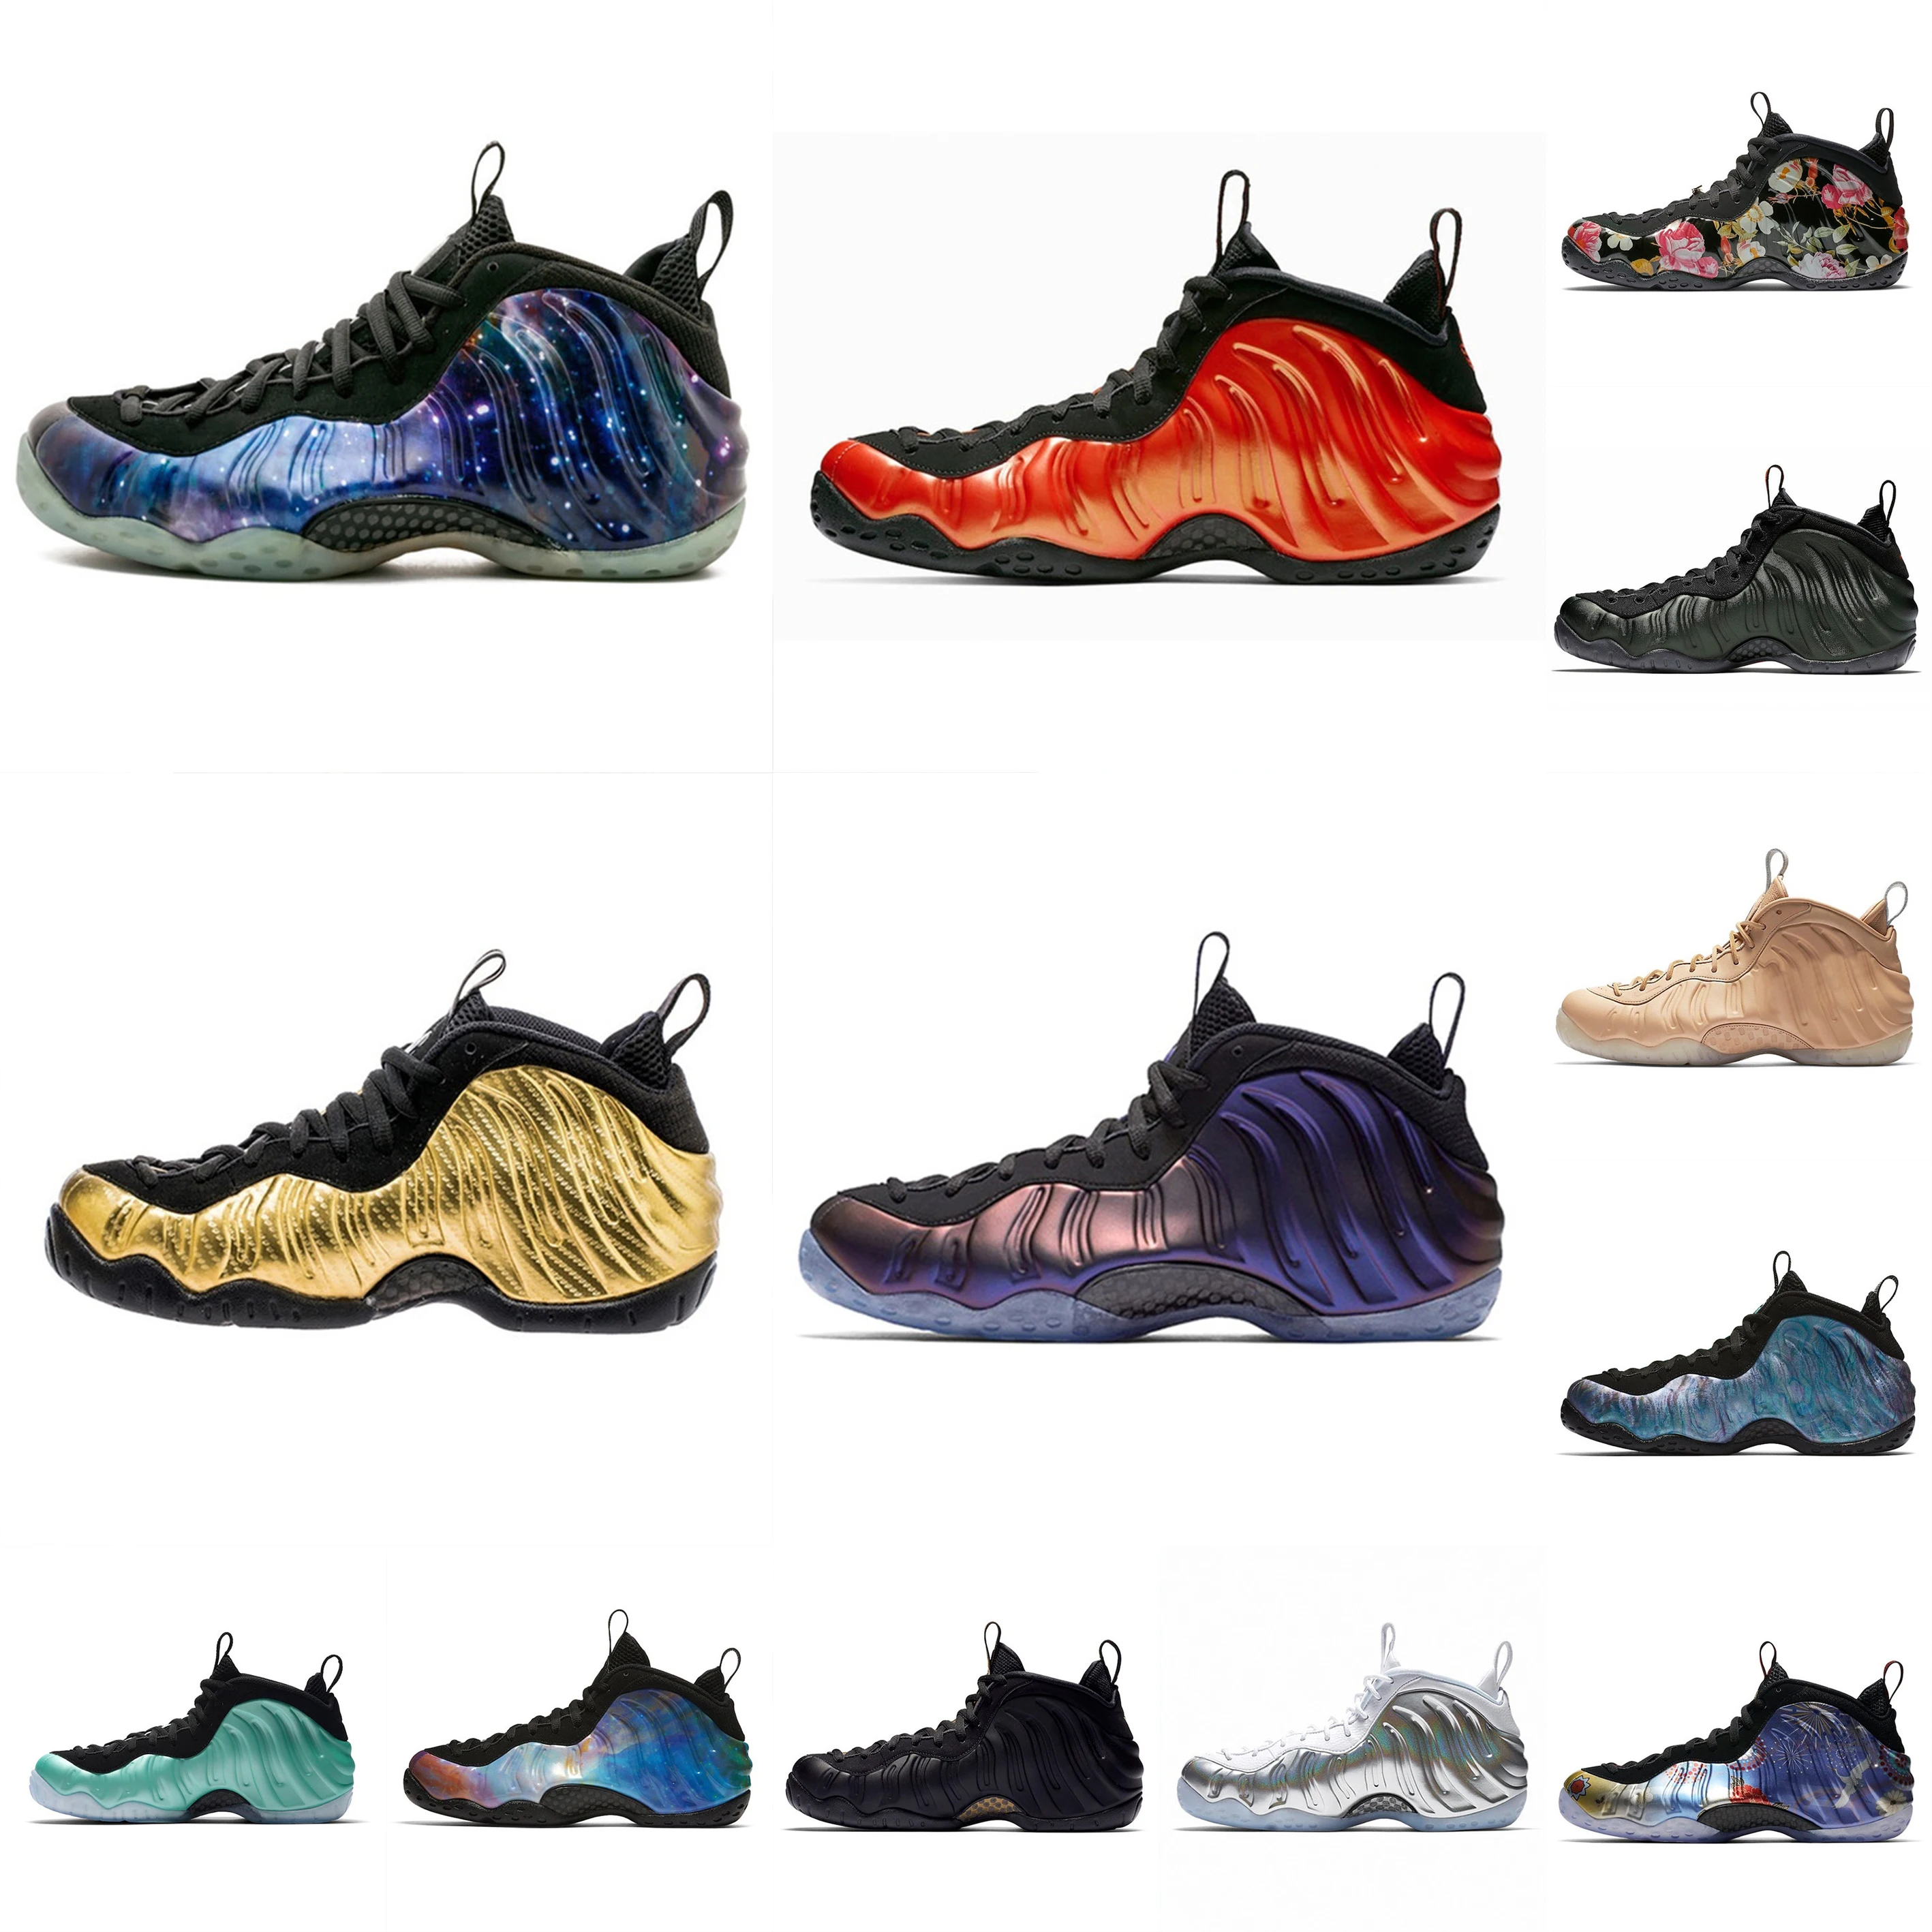 

Hot Sale Penny Hardaway Mens Basketball Shoes Foam One Shattered Air Foamposite Men Sneakers Sports Trainers 40-47